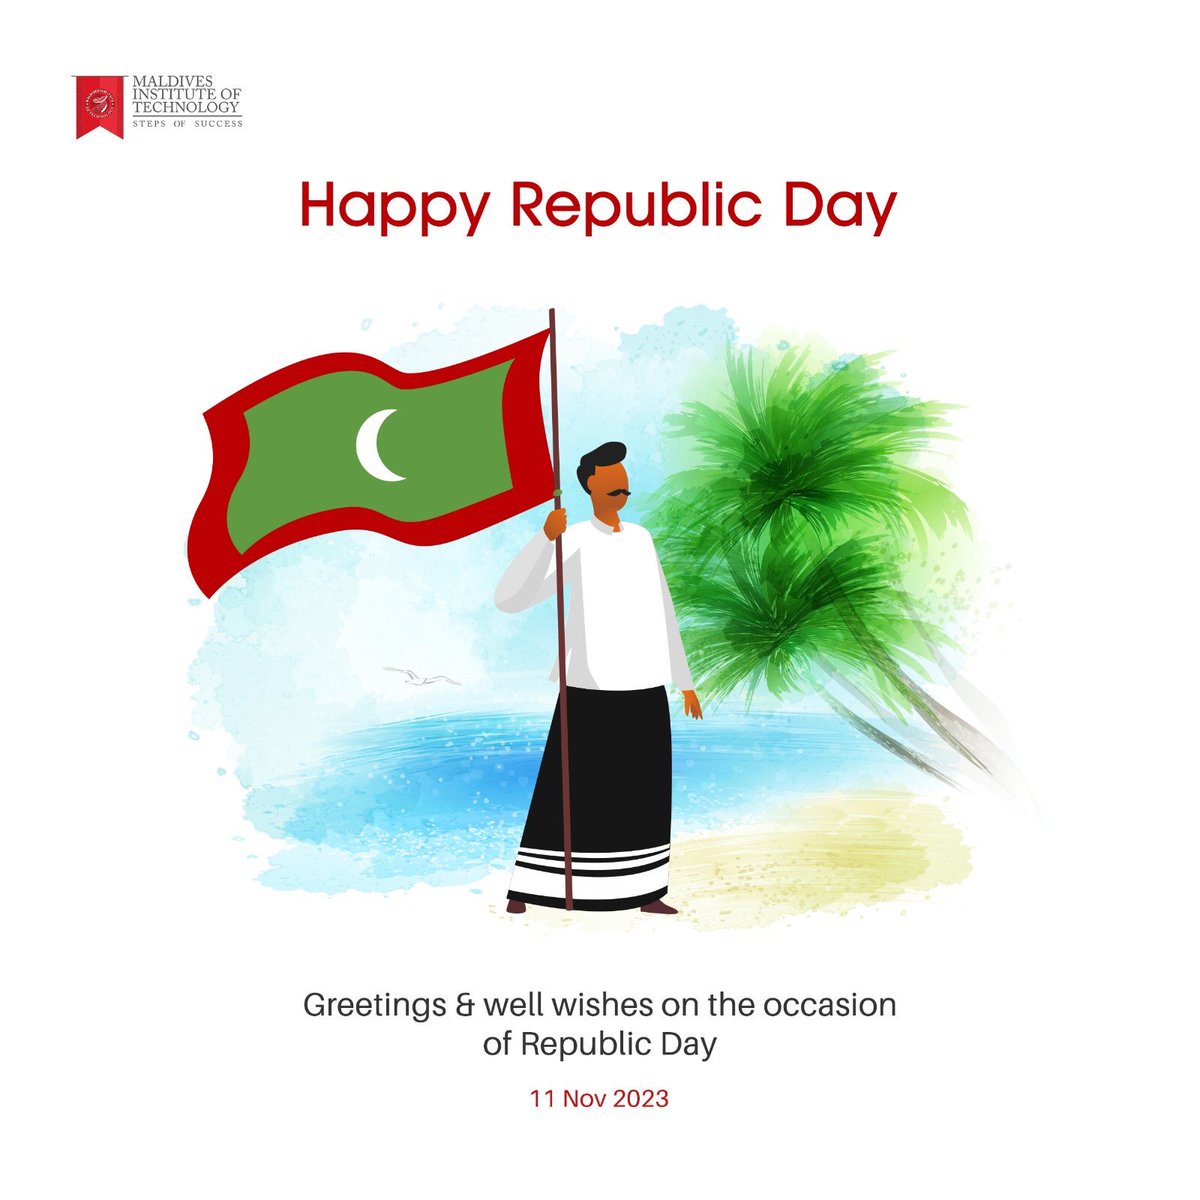 Happy Republic Day to all!